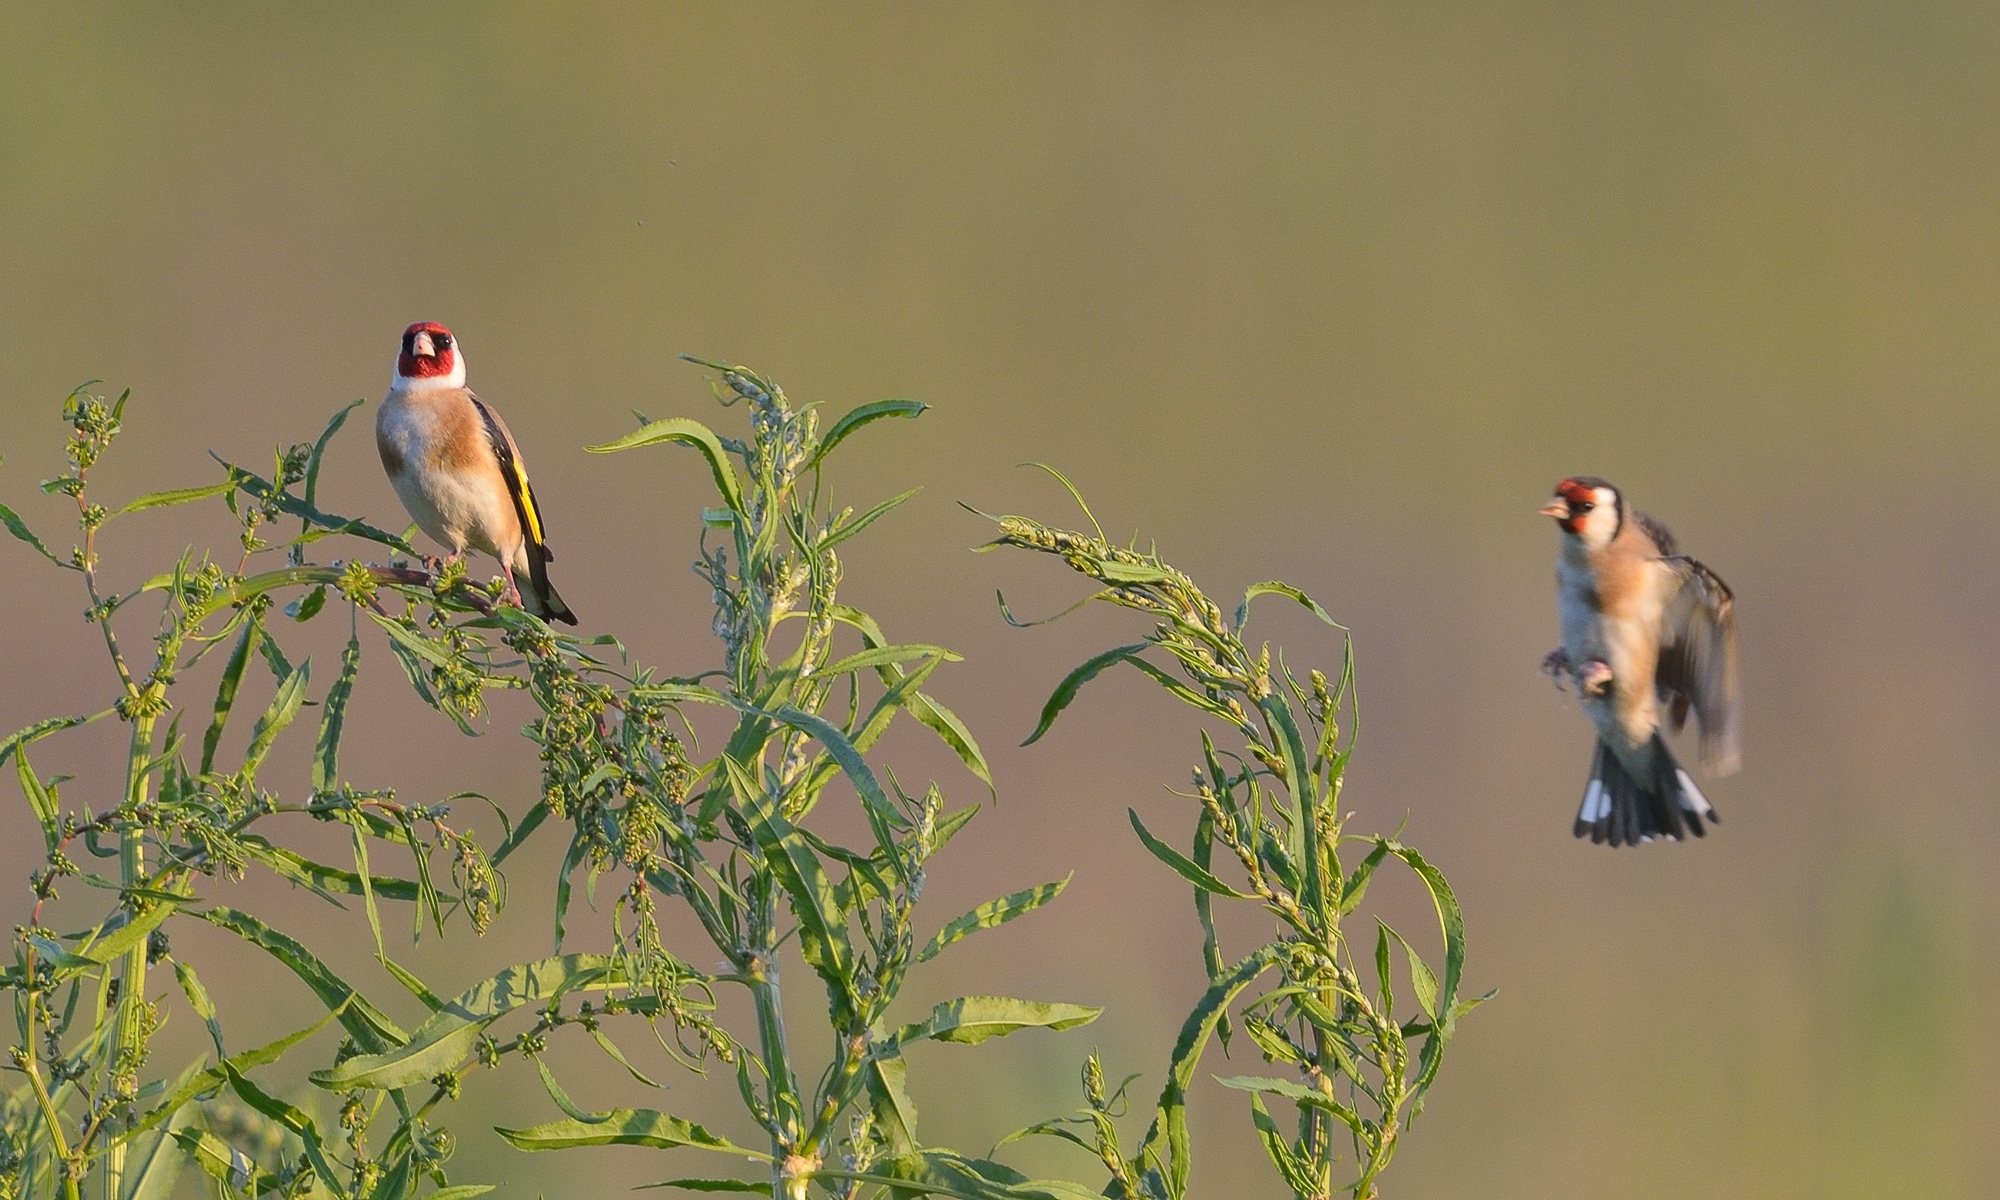 Goldfinches at sunset...